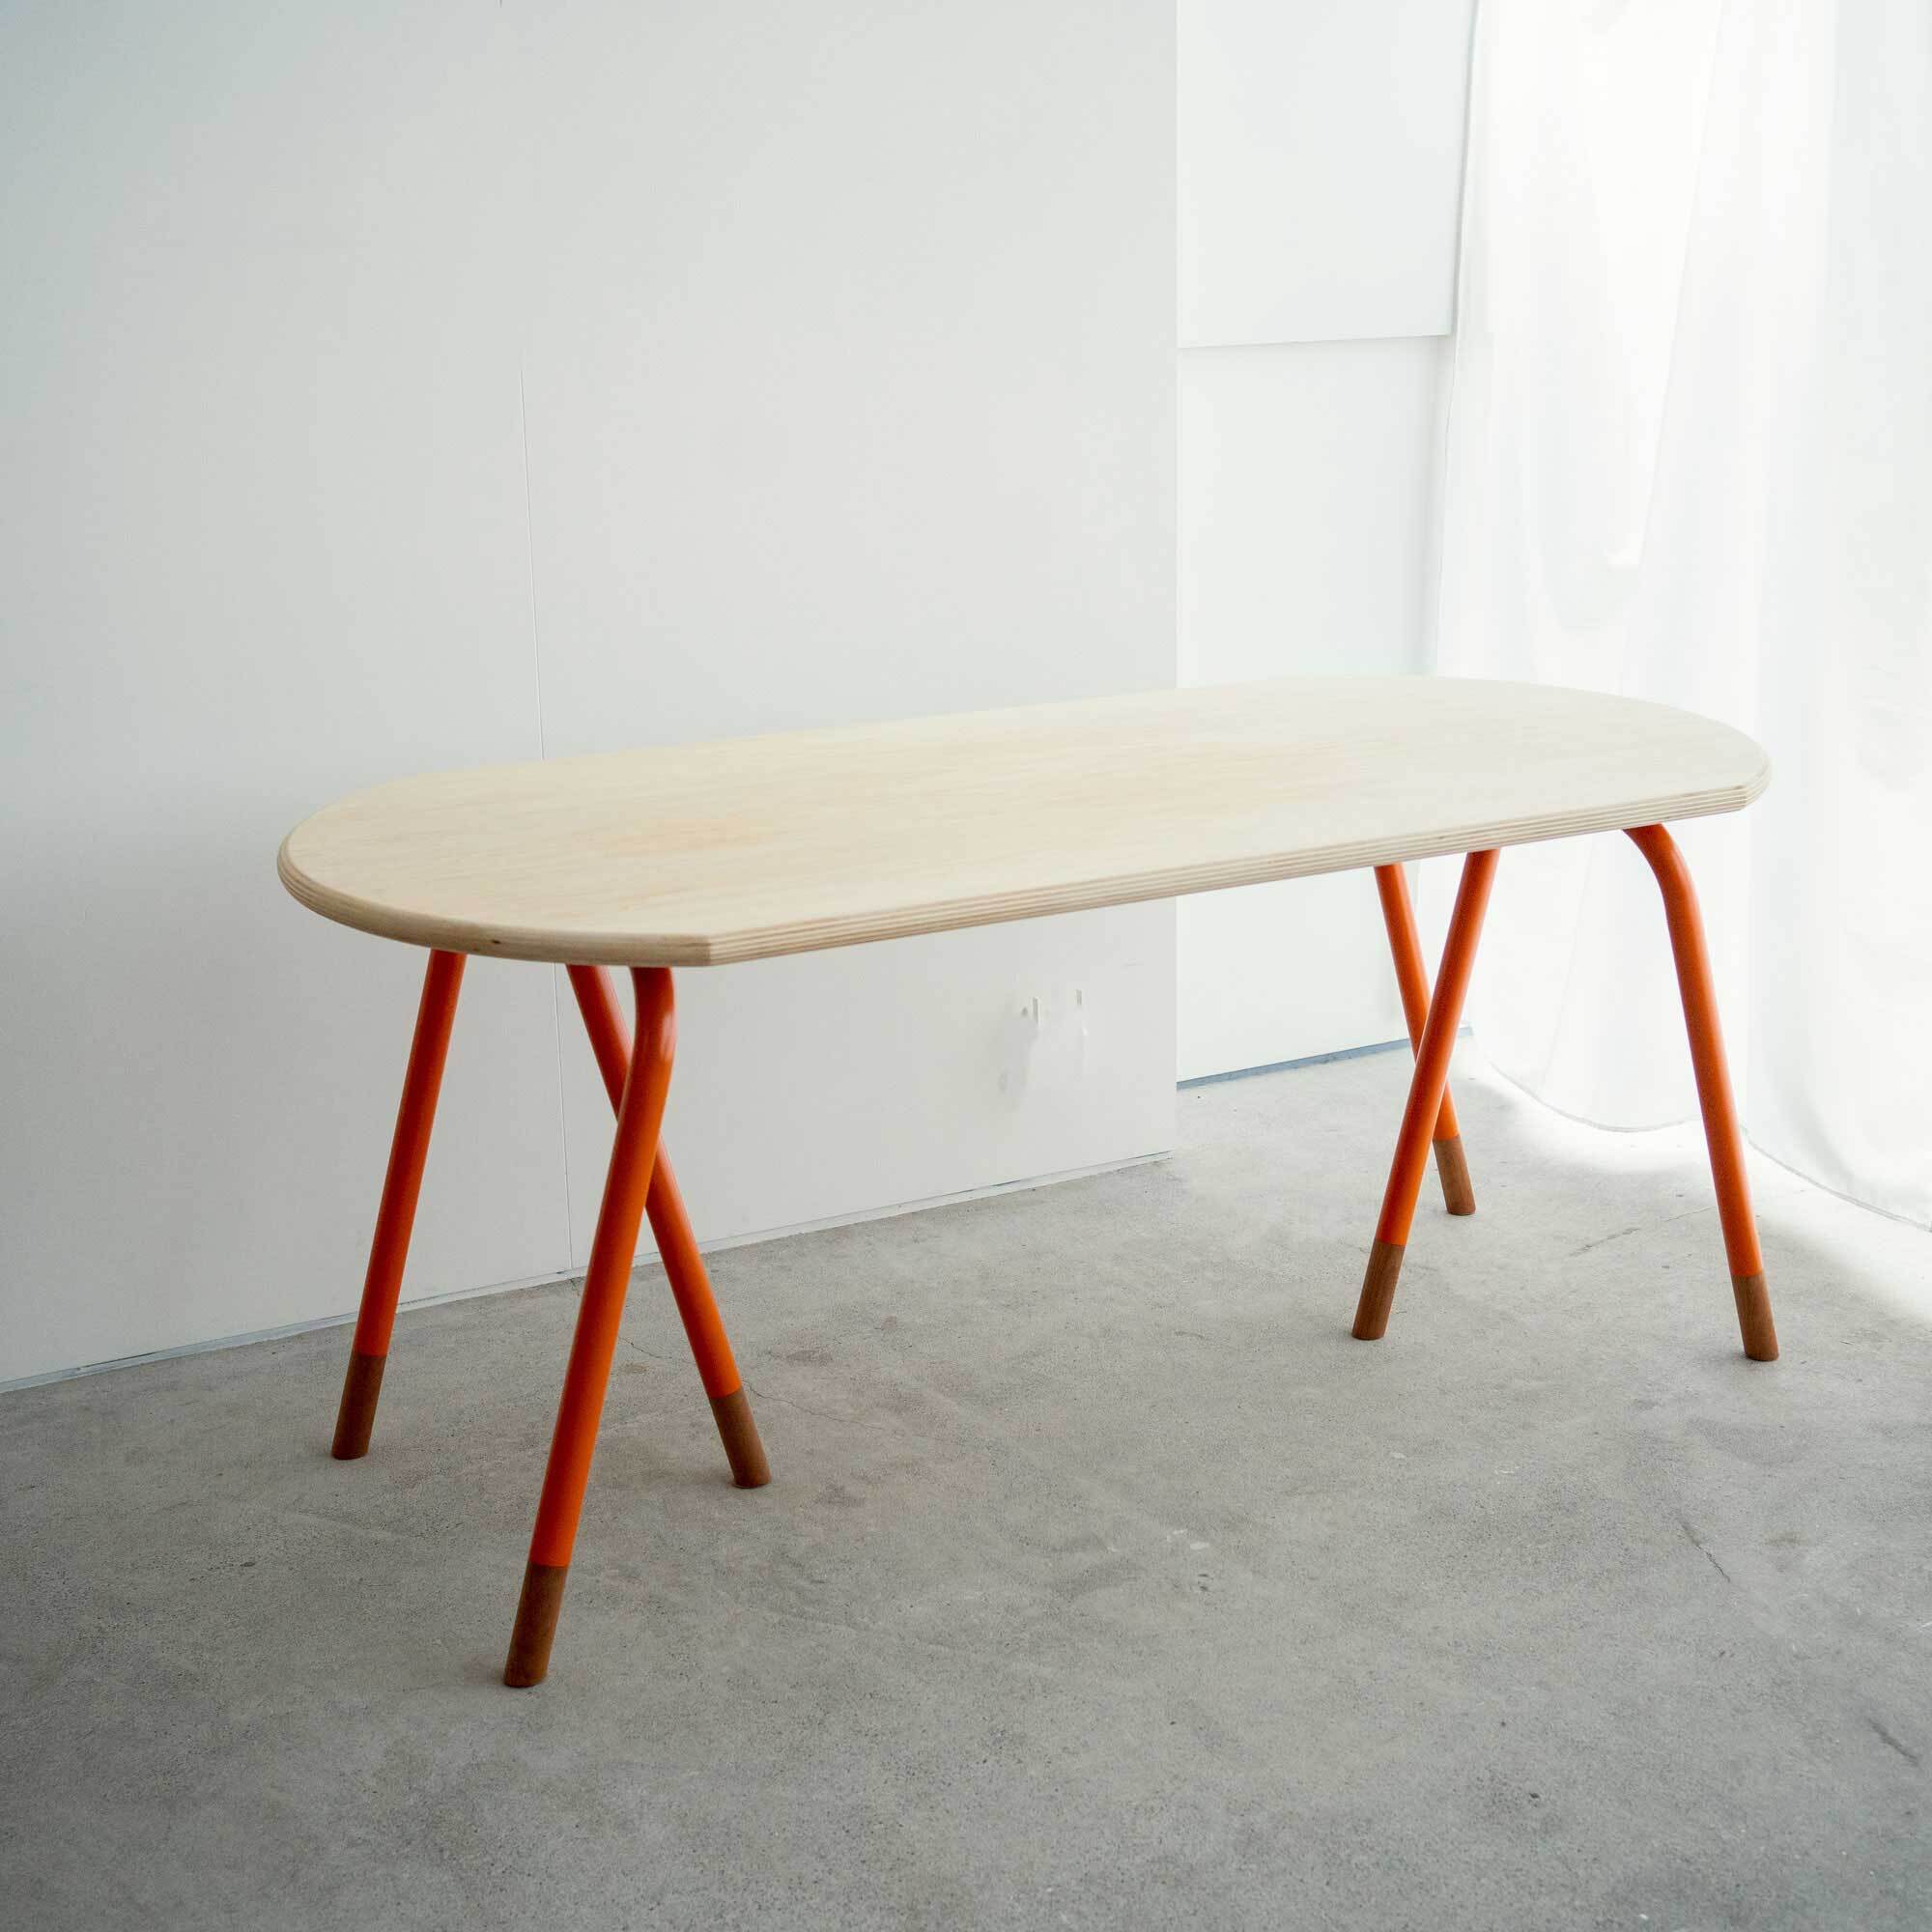 Table with plywood top and steel pipe legs | WOODWORK makers market